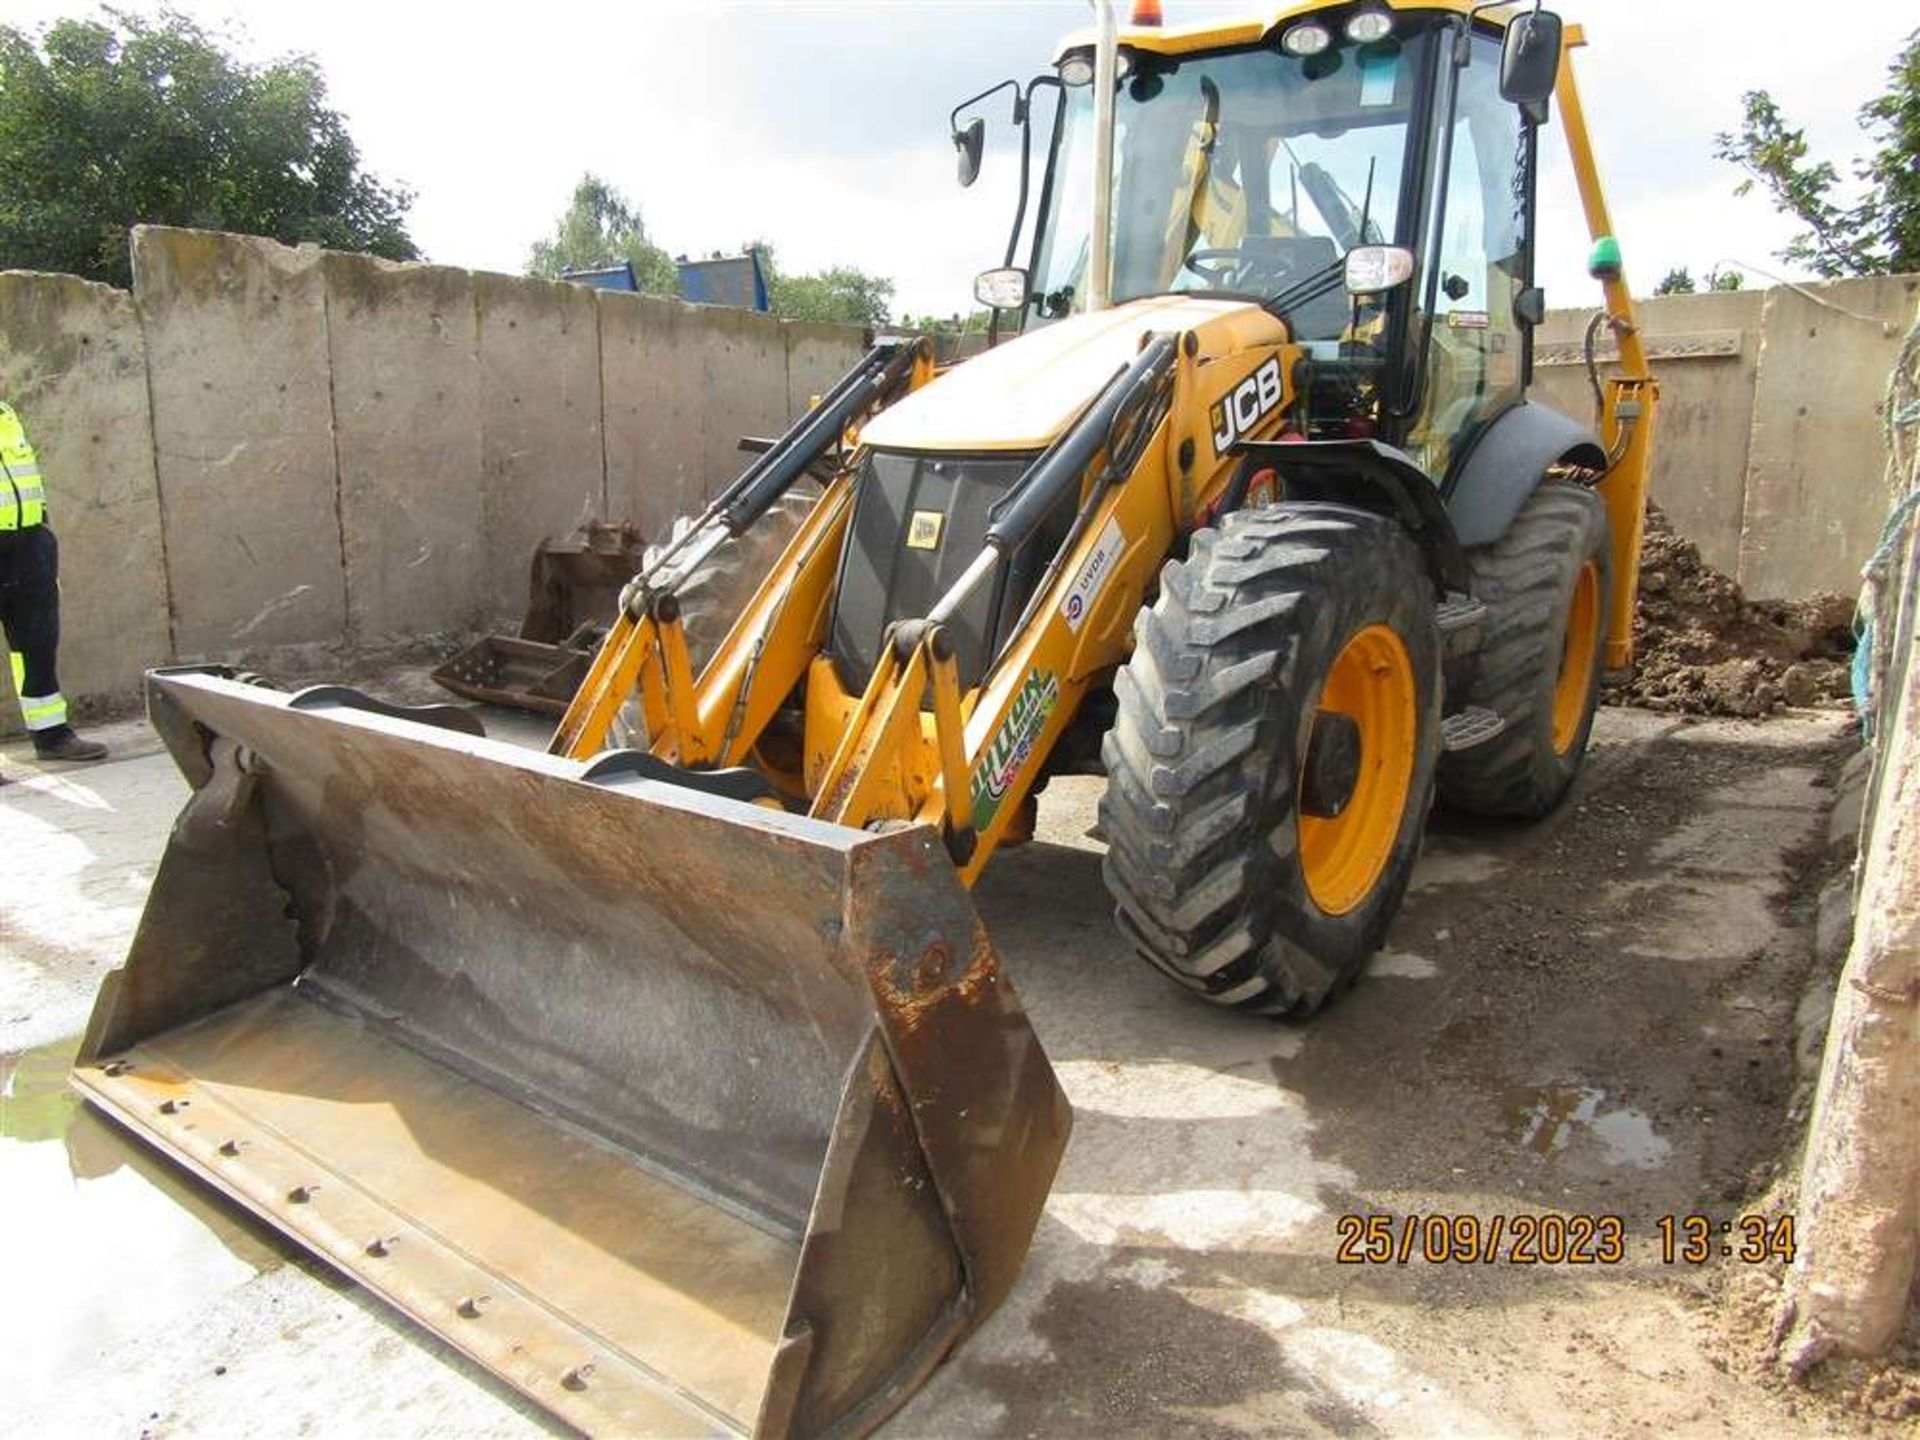 2014 14 reg JCB 4CX Super Site Master with Pole Height Limiters Spec & 4 Buckets - Image 2 of 10